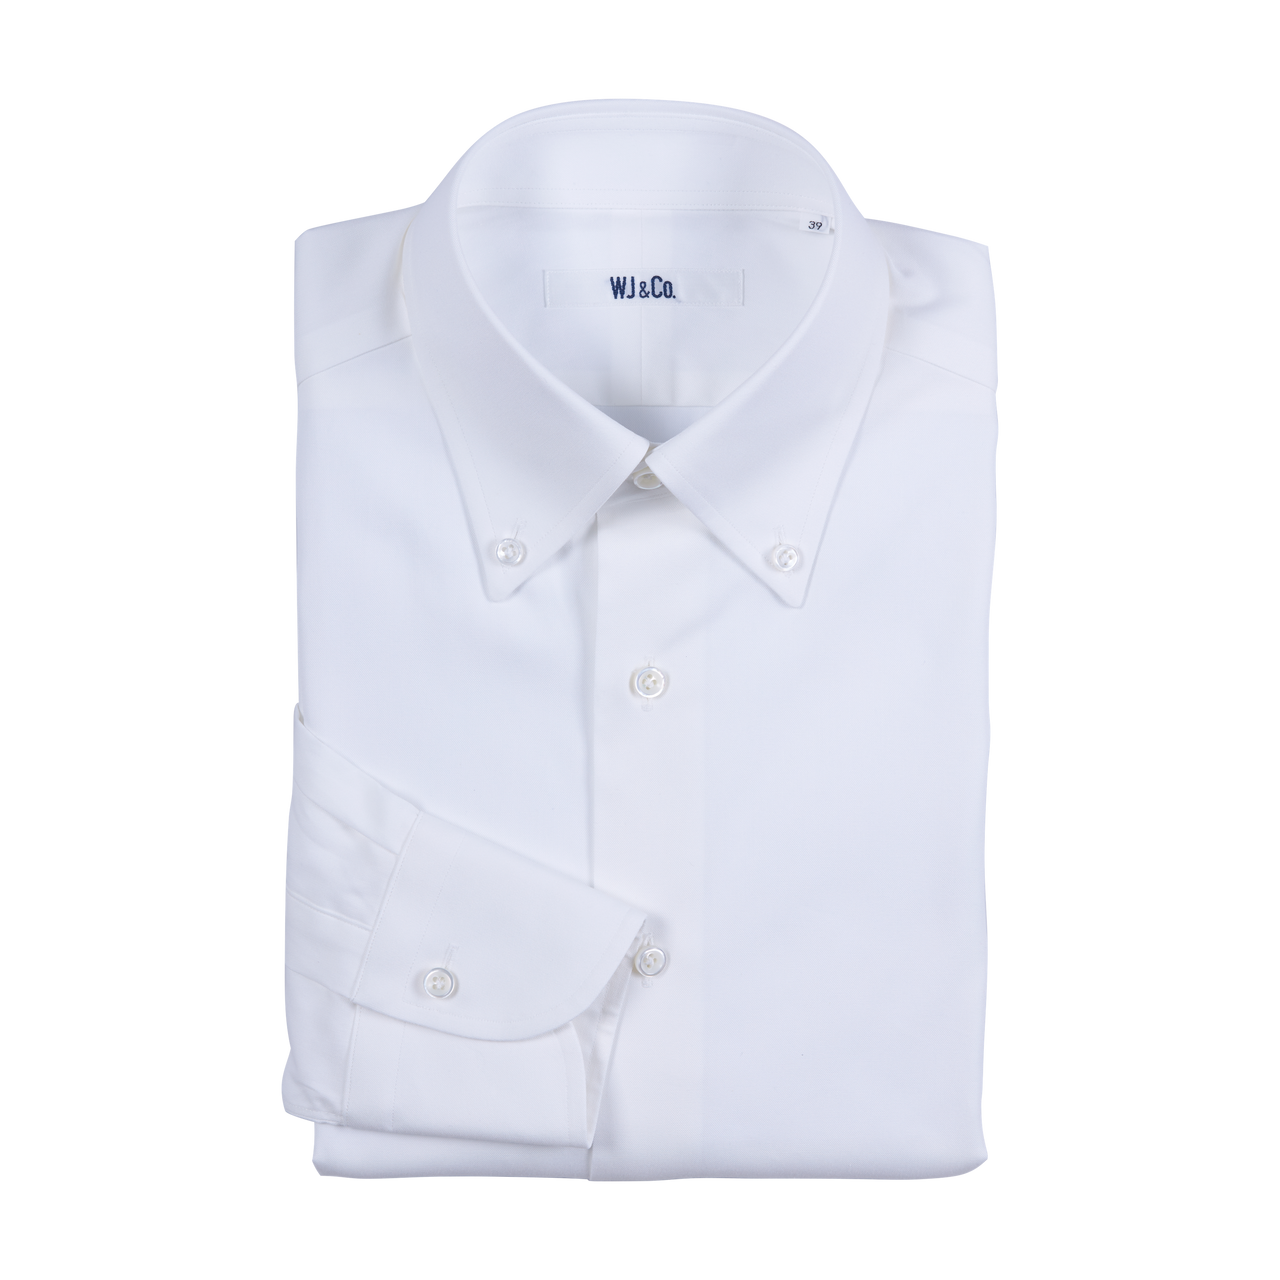 WJ & Co. Shirt in White Pinpoint Oxford with Button Down Collar